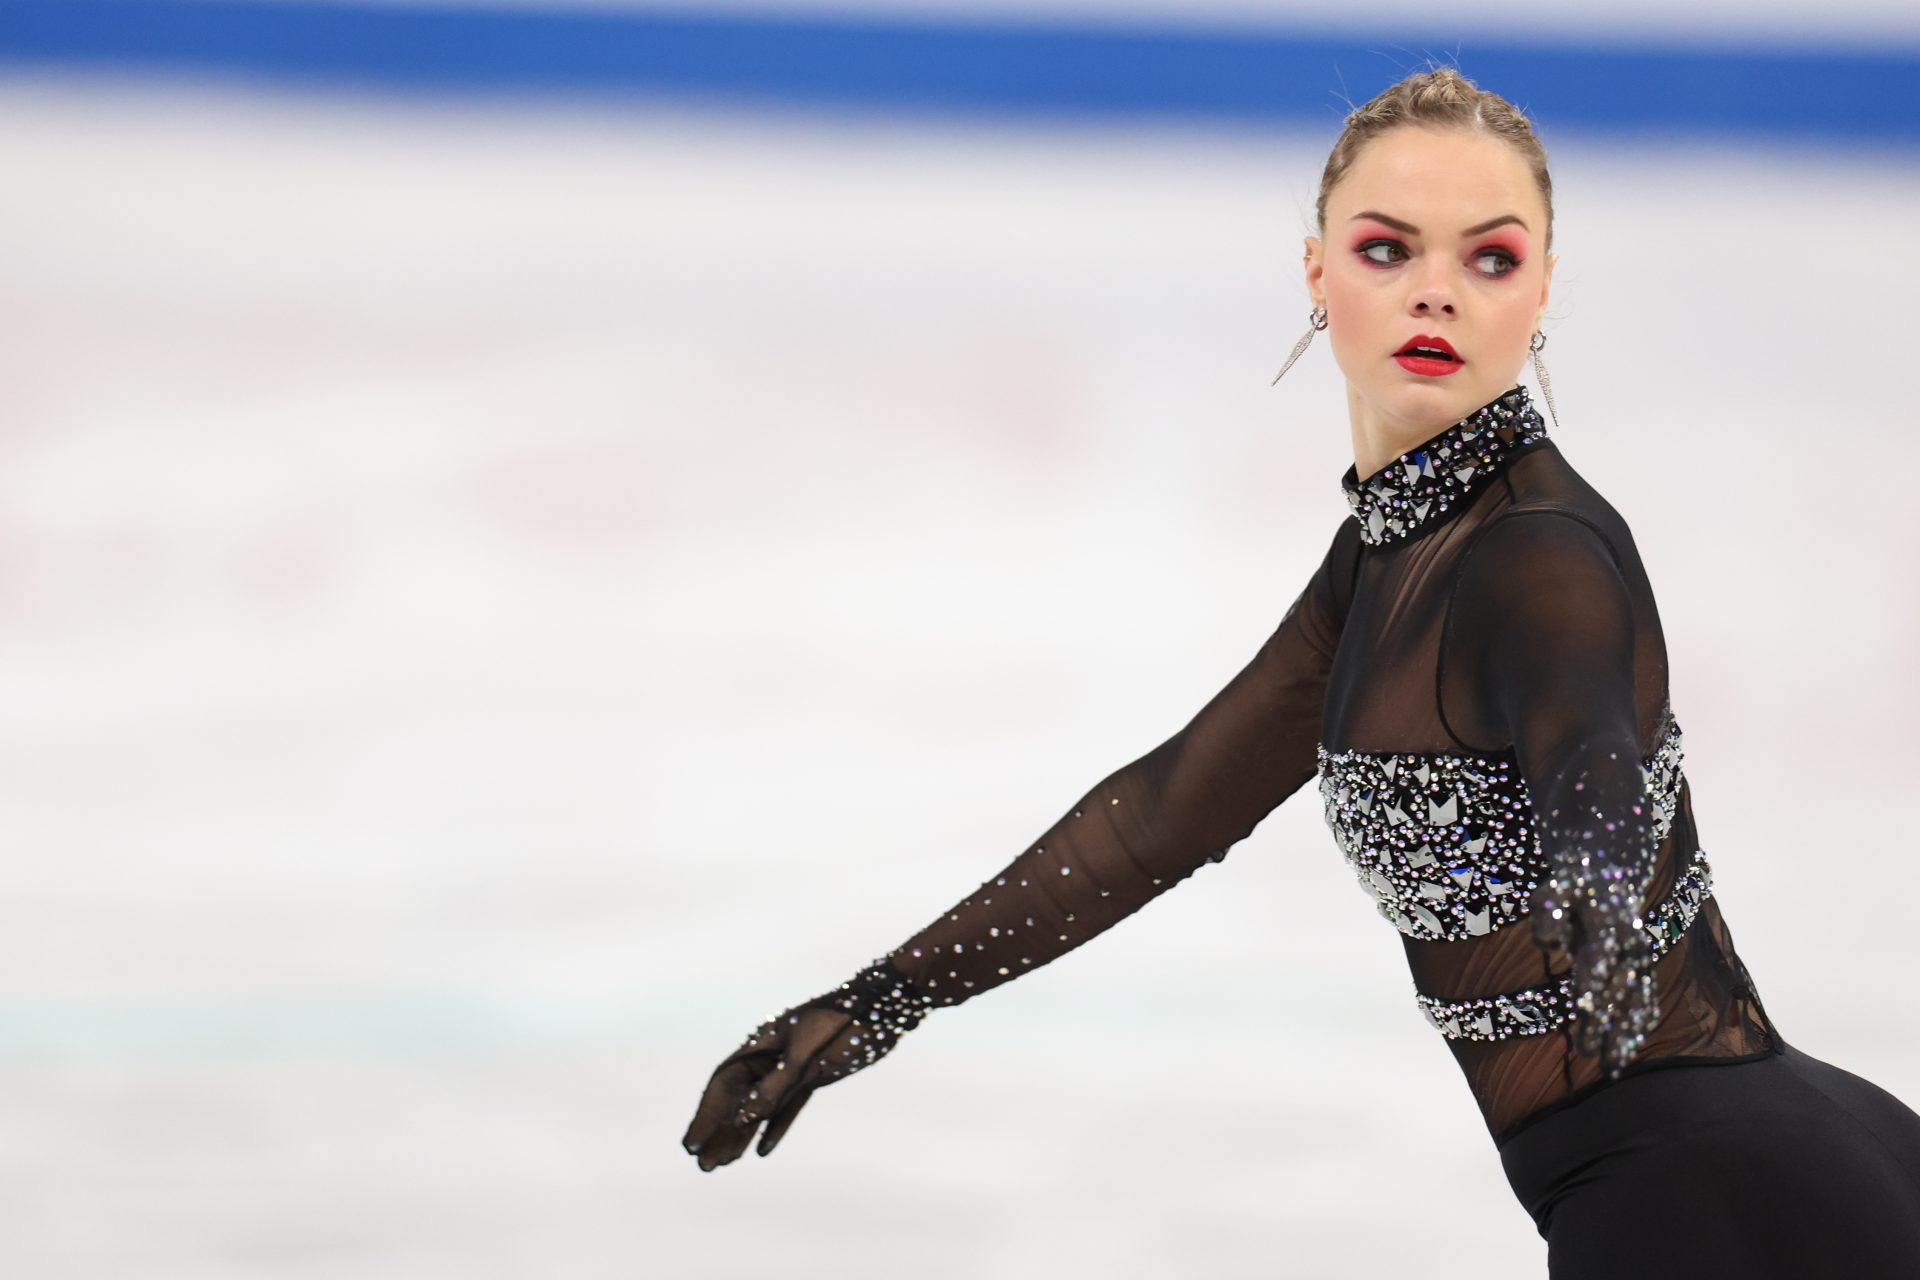 Loena Hendrickx, Belgium's figure skating queen who just missed out on the world title